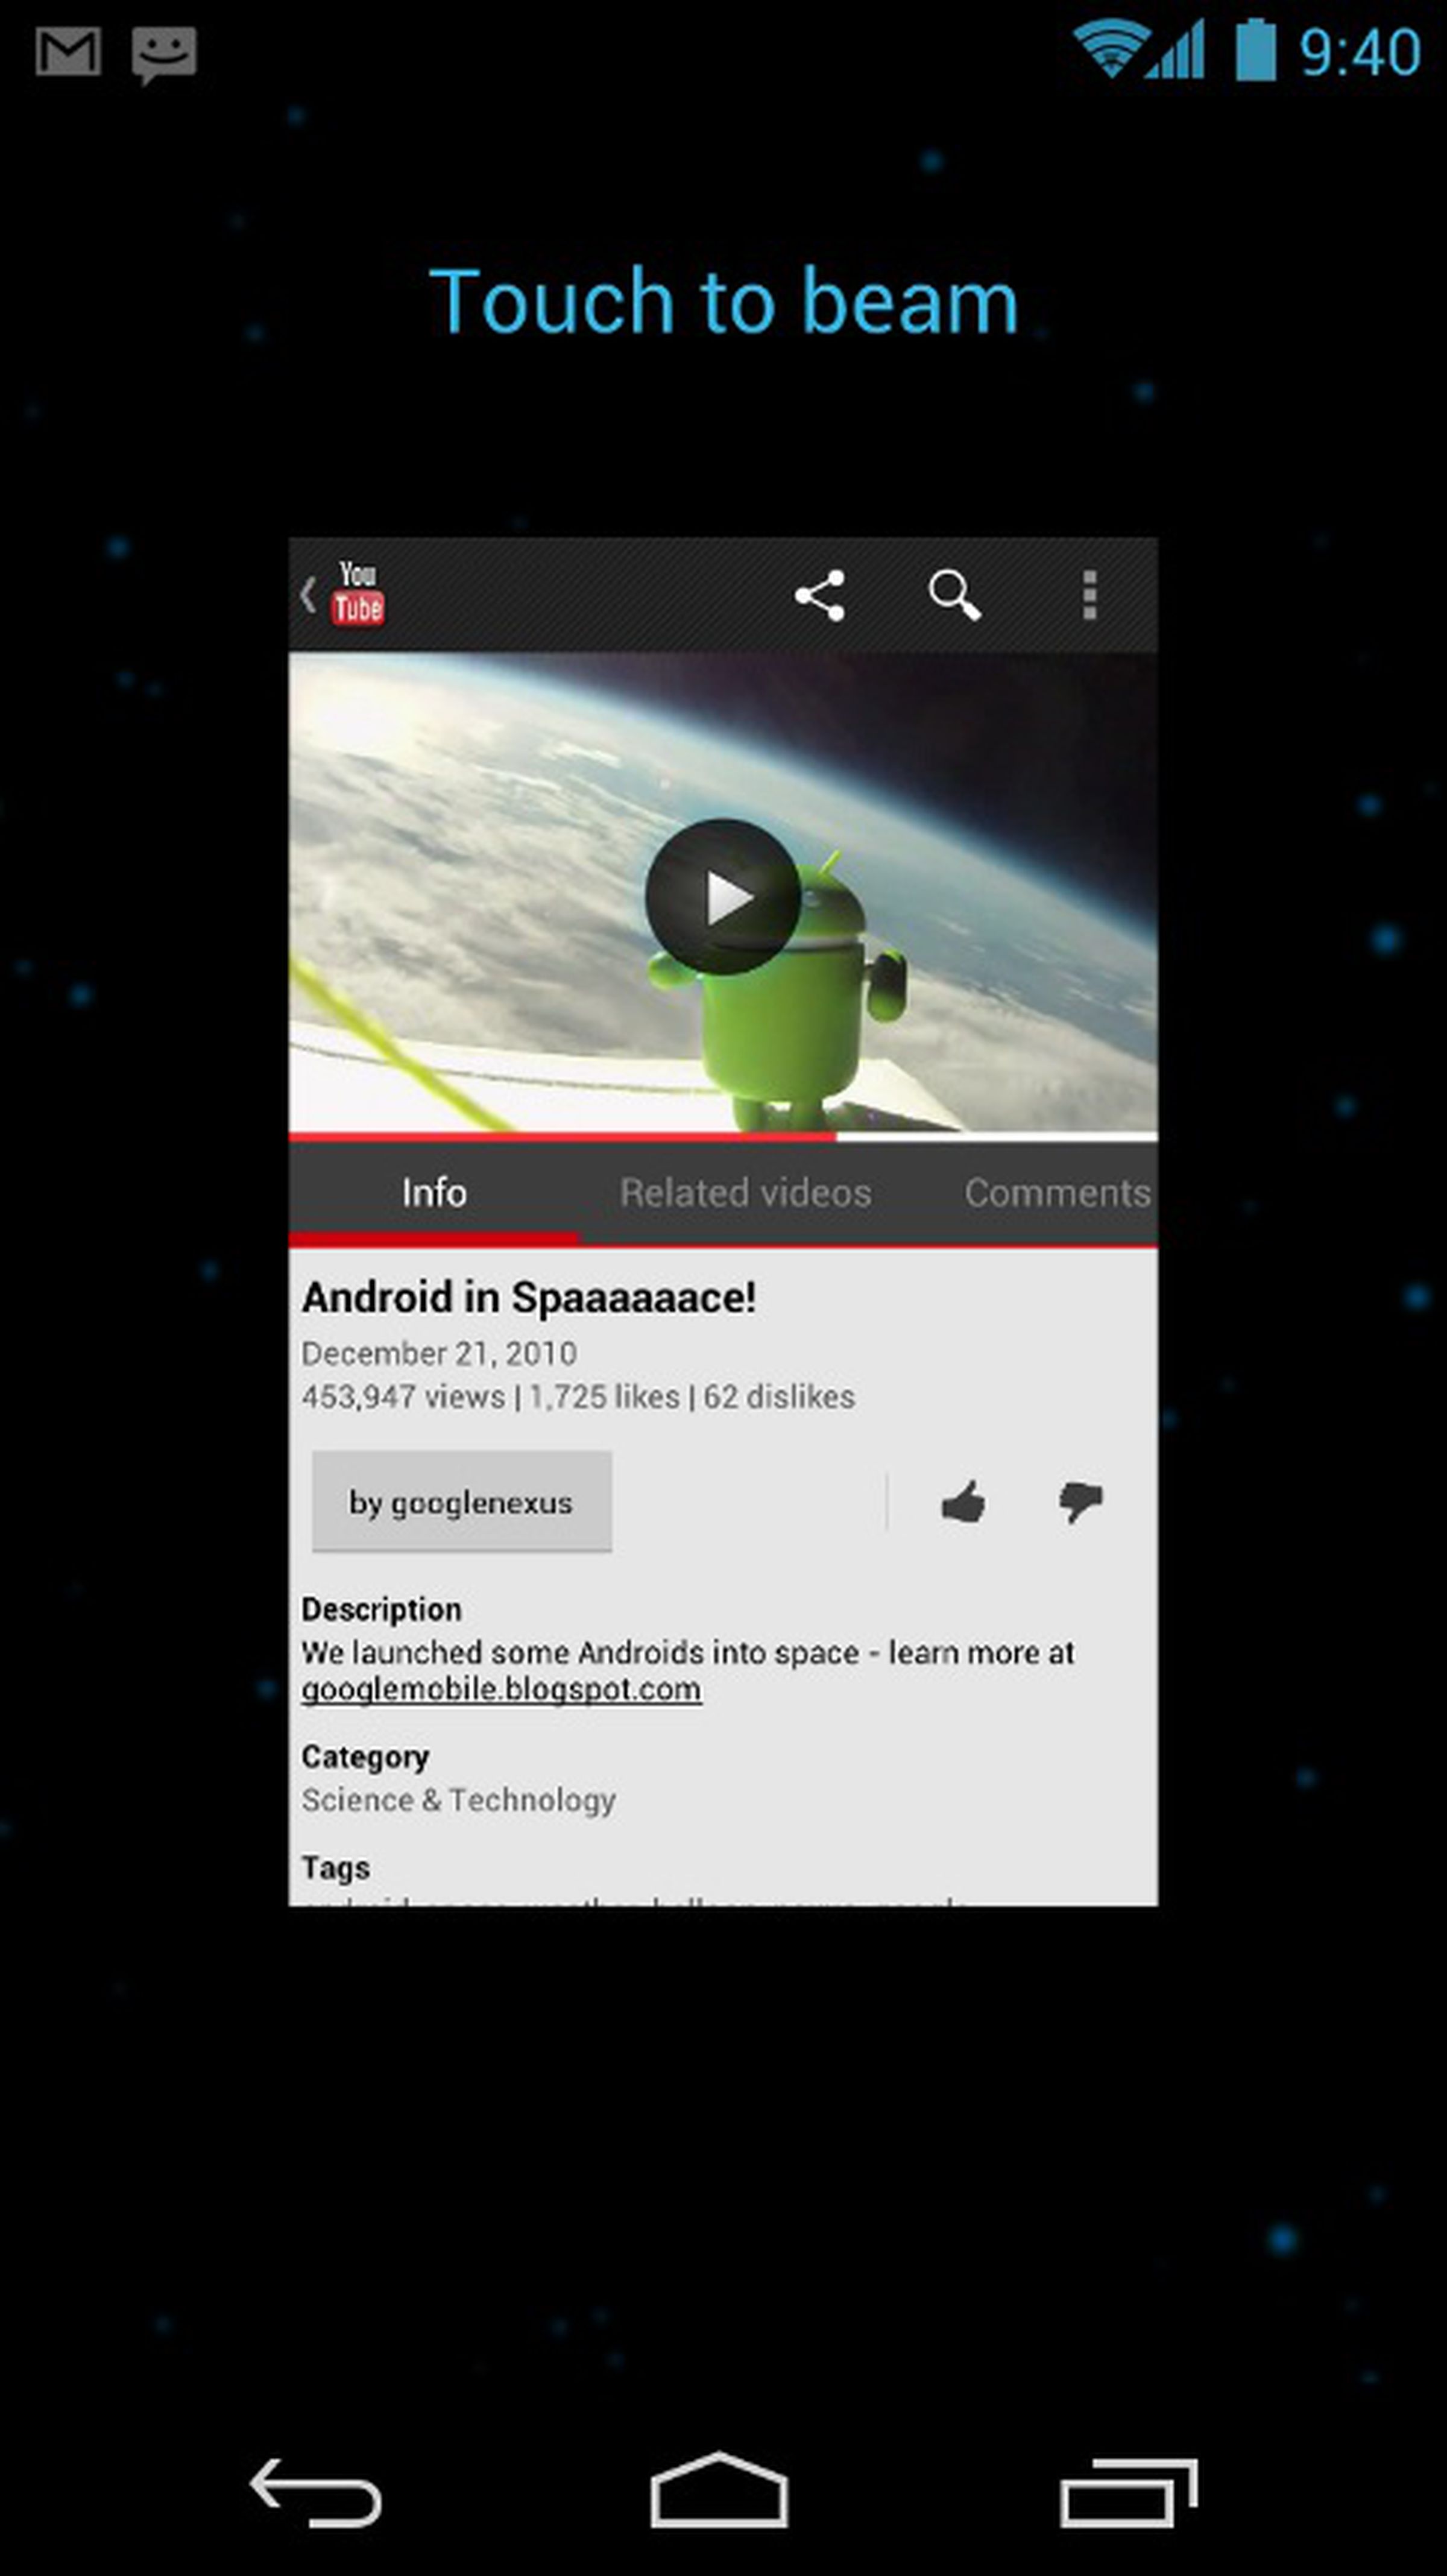 Android 4.0 ‘Ice Cream Sandwich’ official: release in November, SDK available today 